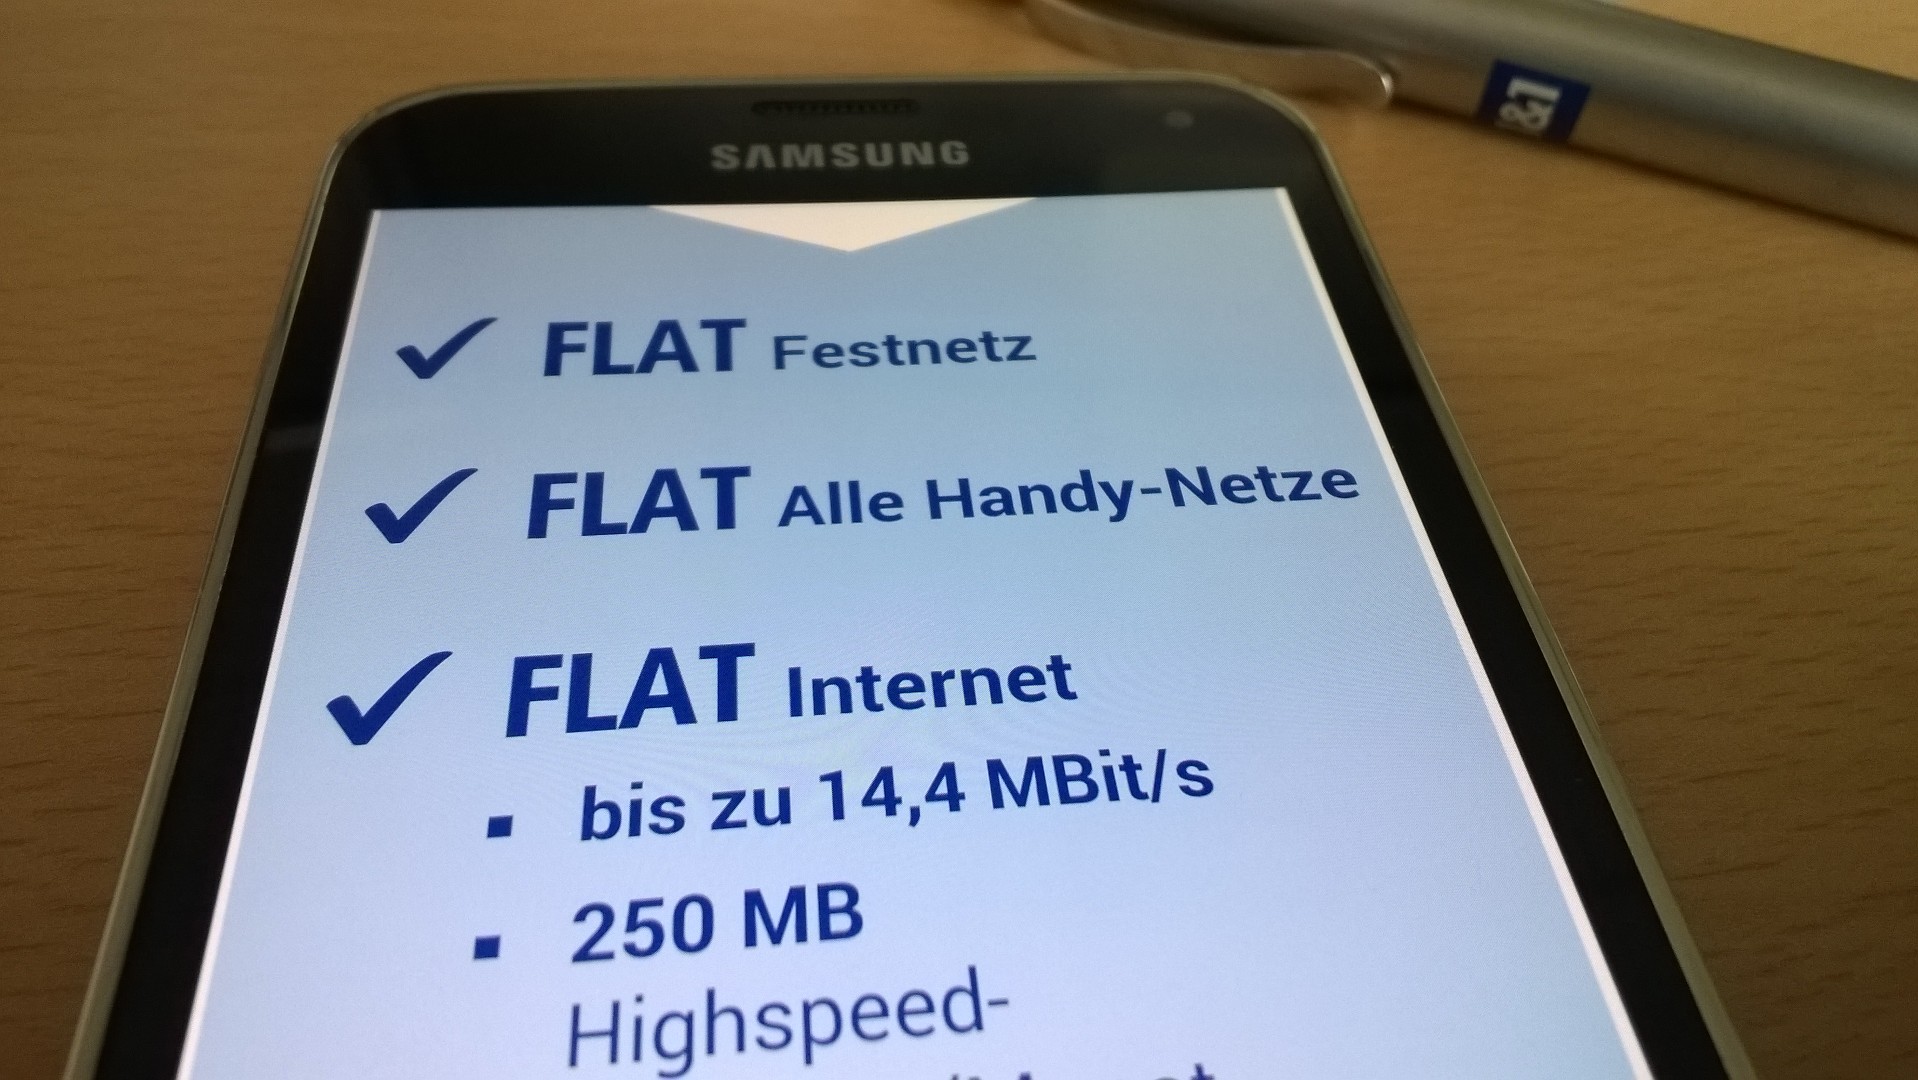 1&1 All-Net-Flat Special